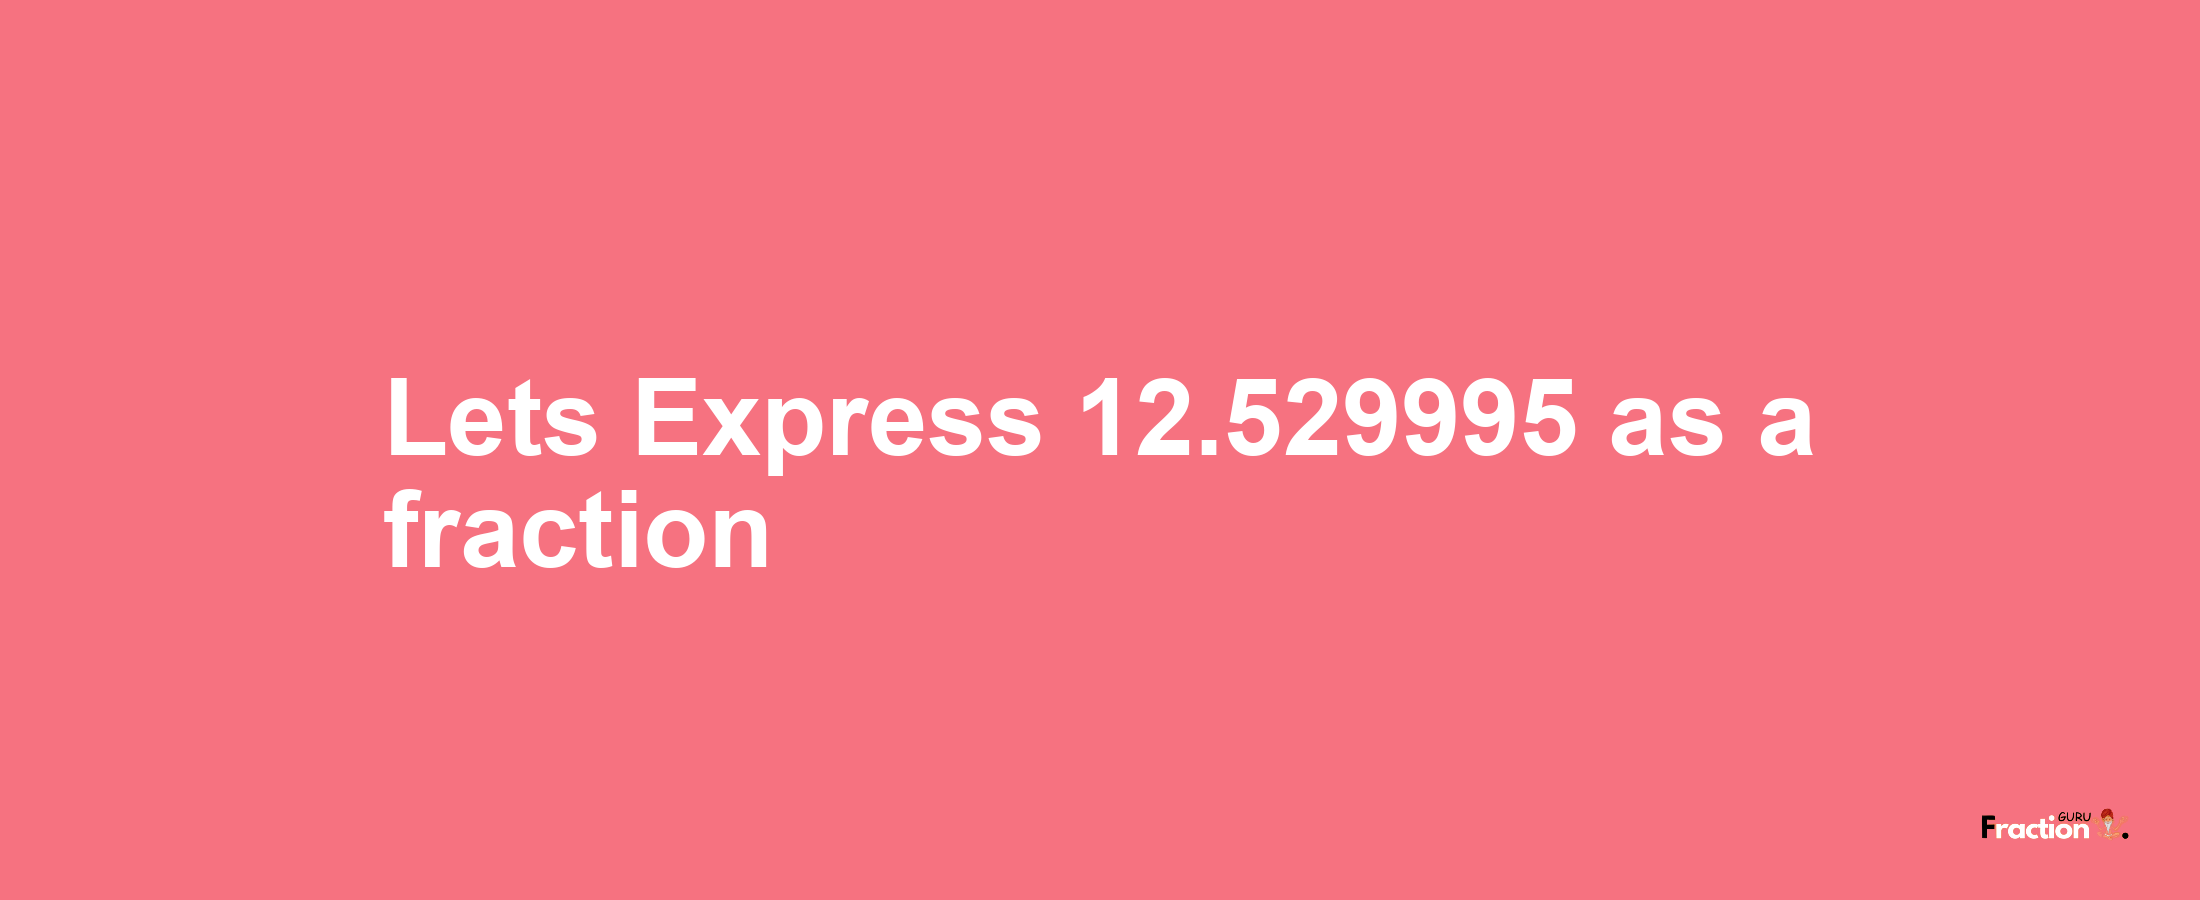 Lets Express 12.529995 as afraction